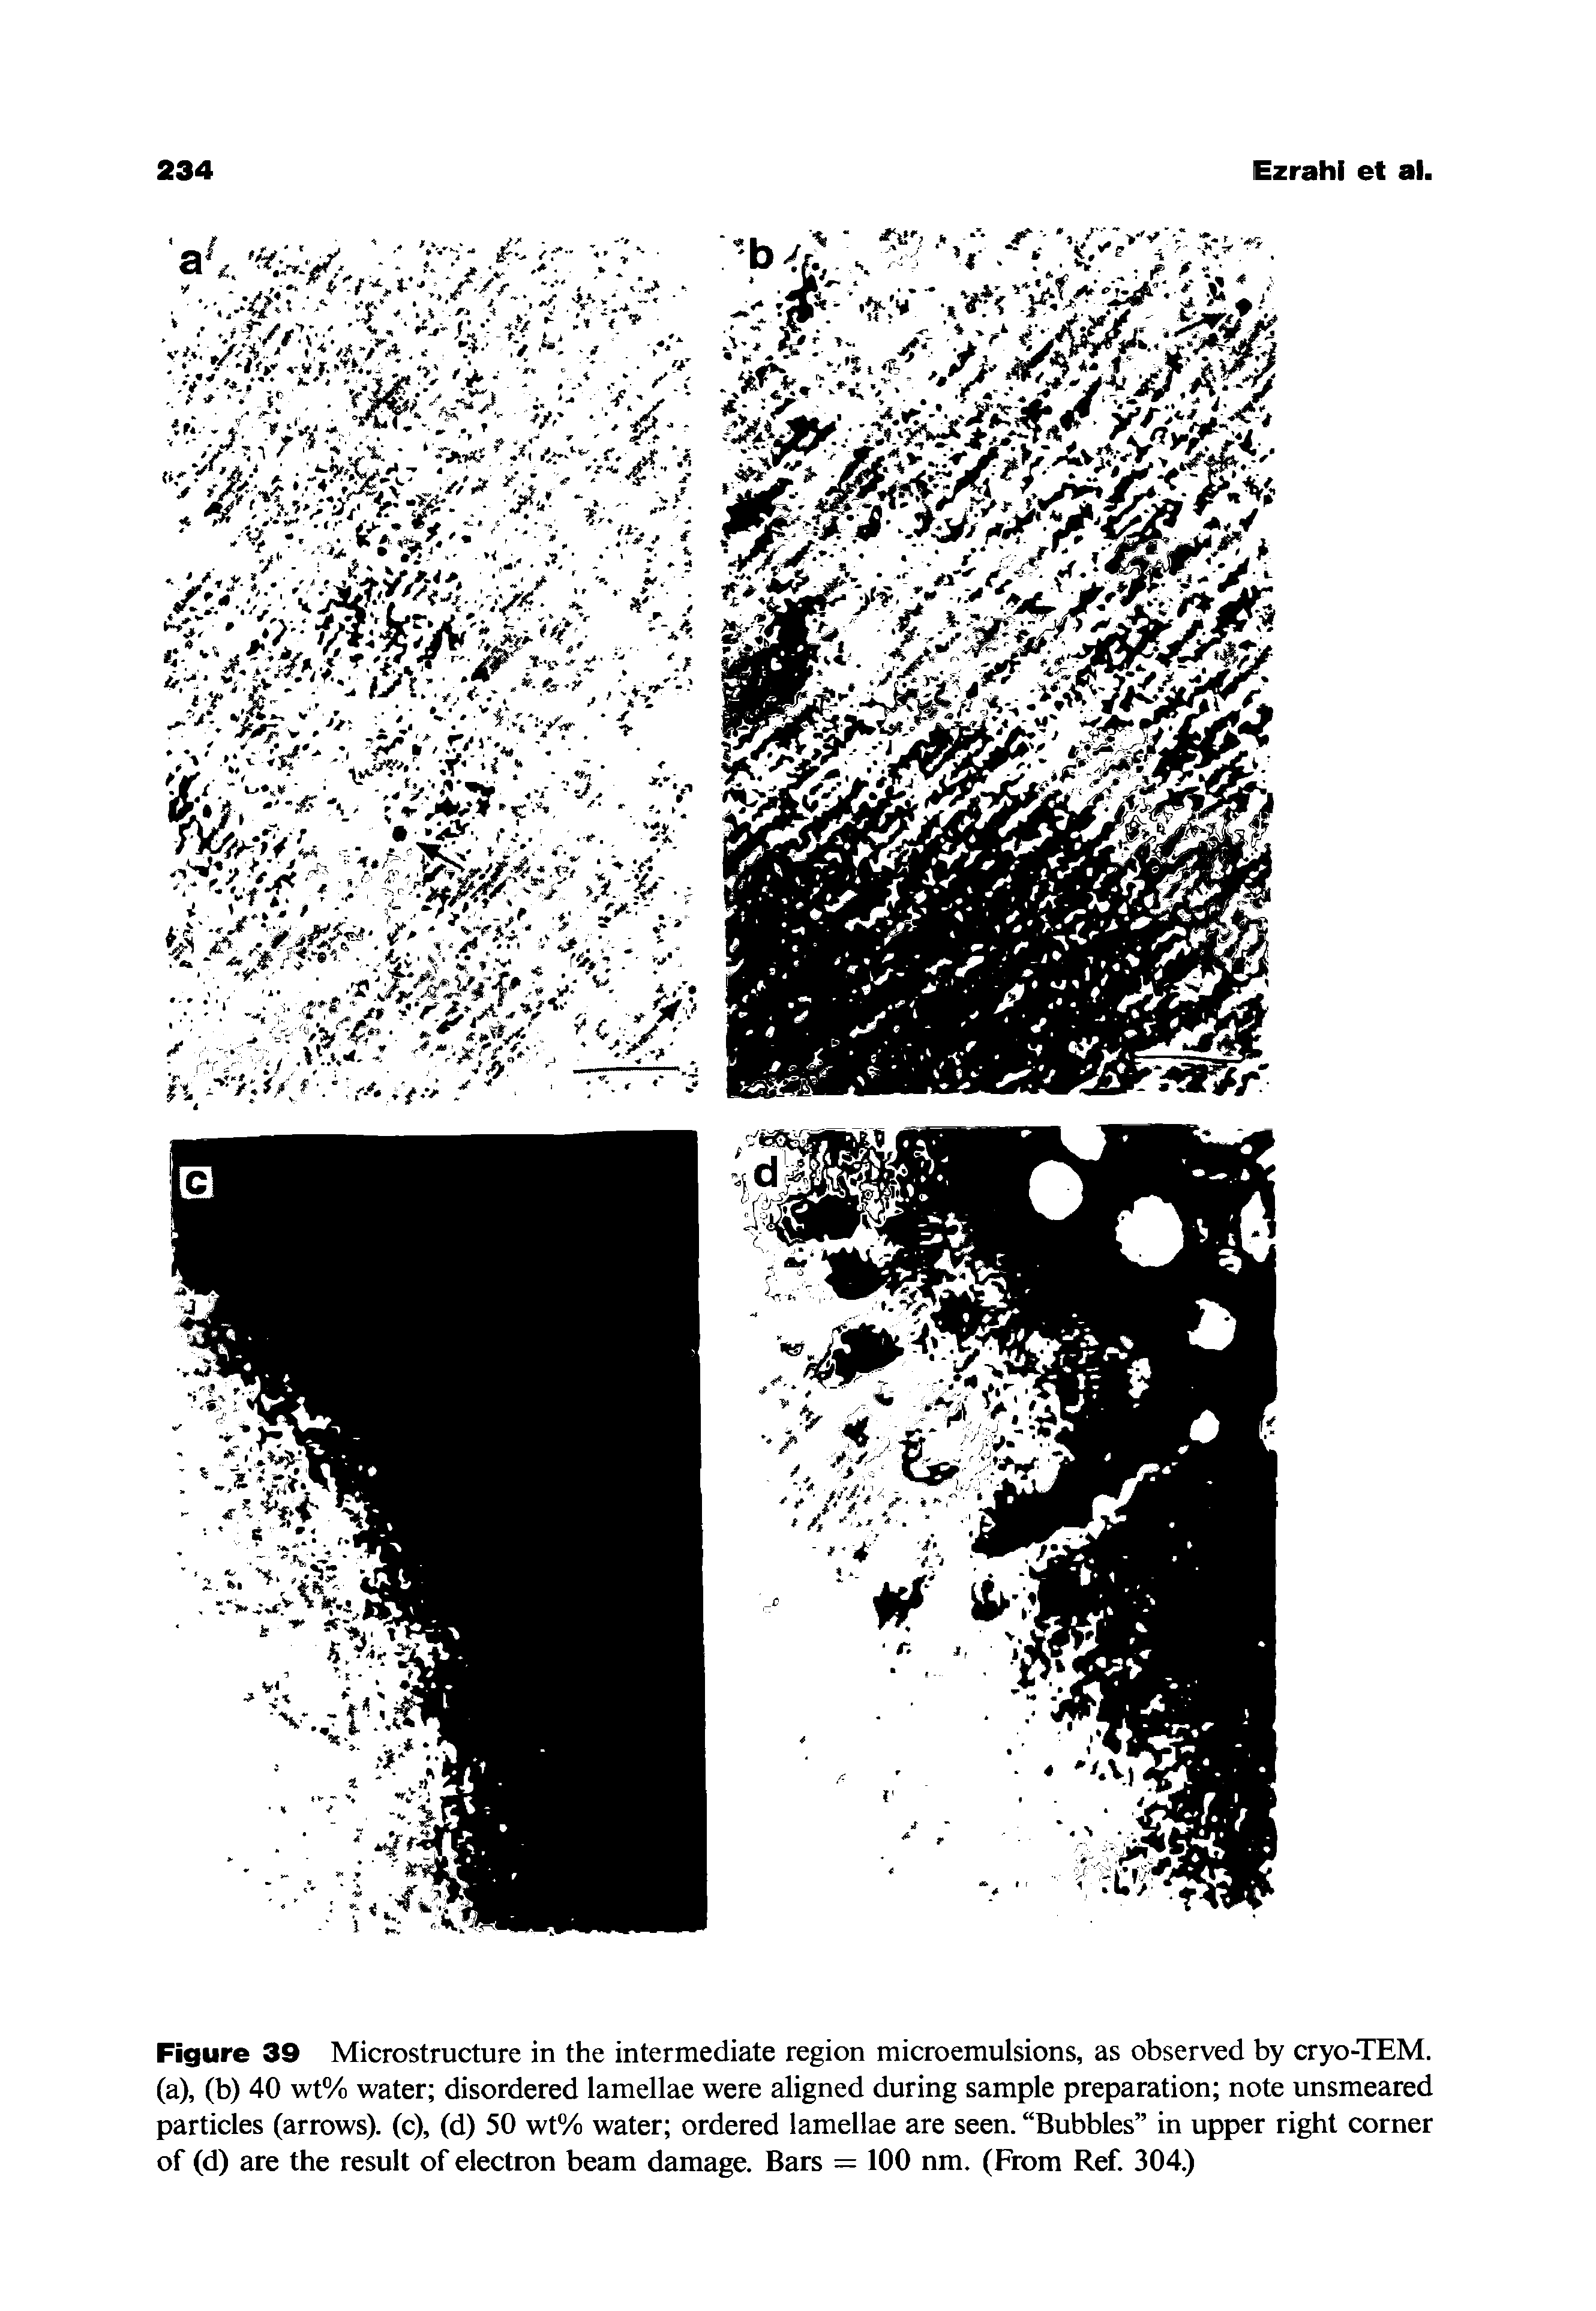 Figure 39 Microstructure in the intermediate region microemulsions, as observed by cryo-TEM. (a), (b) 40 wt% water disordered lamellae were aligned during sample preparation note unsmeared particles (arrows), (c), (d) 50 wt% water ordered lamellae are seen. Bubbles in upper right corner of (d) are the result of electron beam damage. Bars = 100 nm. (From Ref. 304.)...